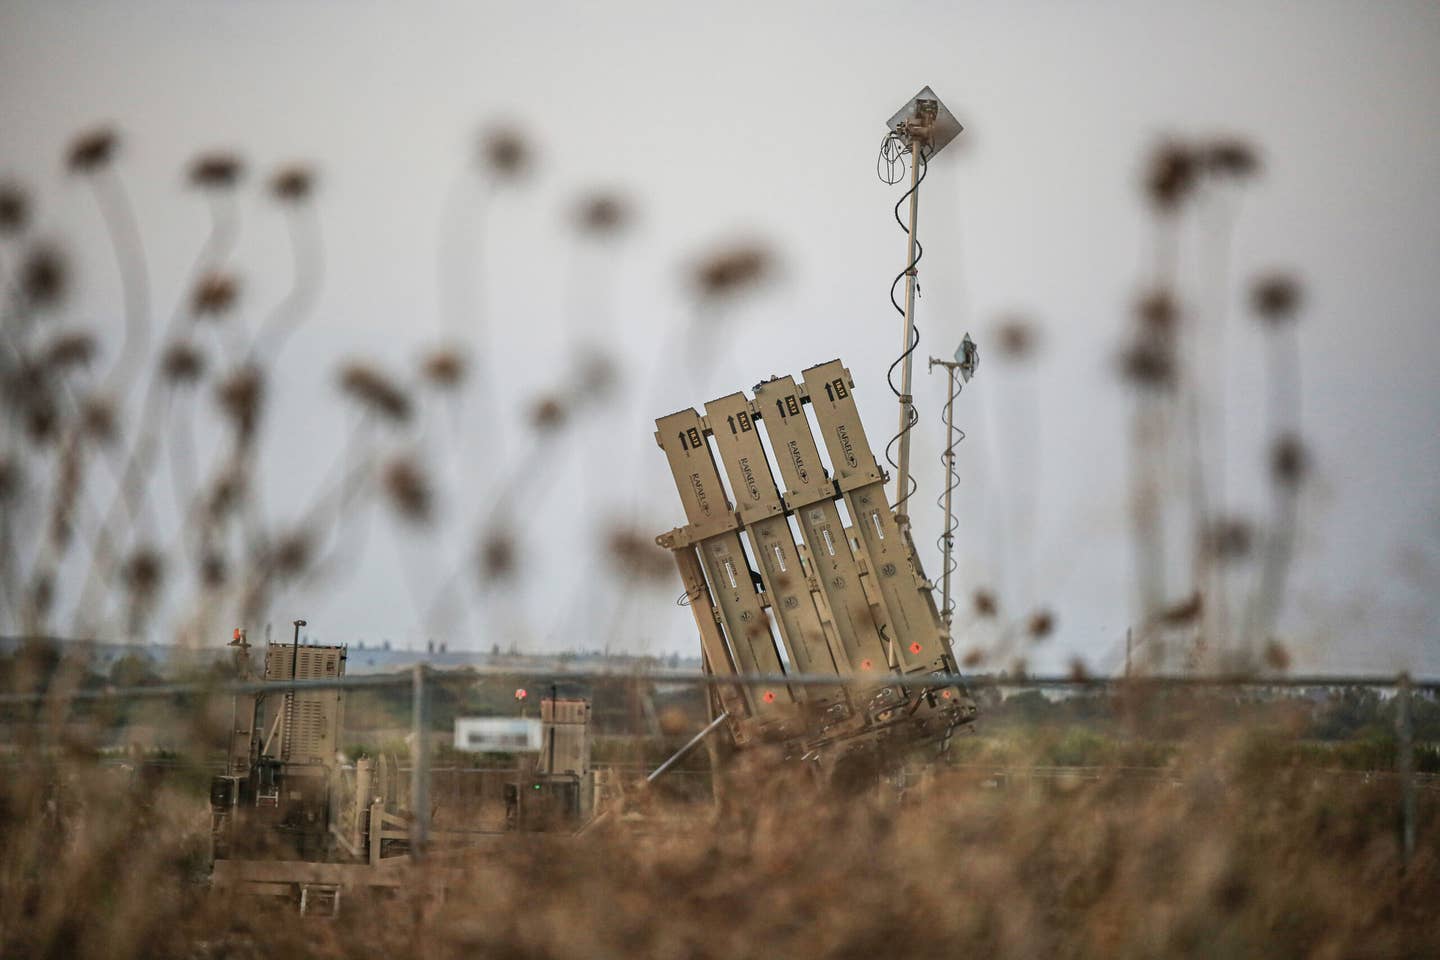 A general view of an Israel Iron Dome air defense system, deployed to intercept rockets launched from Gaza City, over the southern city of Sderot. <em>Photo by Saeed Qaq/SOPA Images/LightRocket via Getty Images</em>